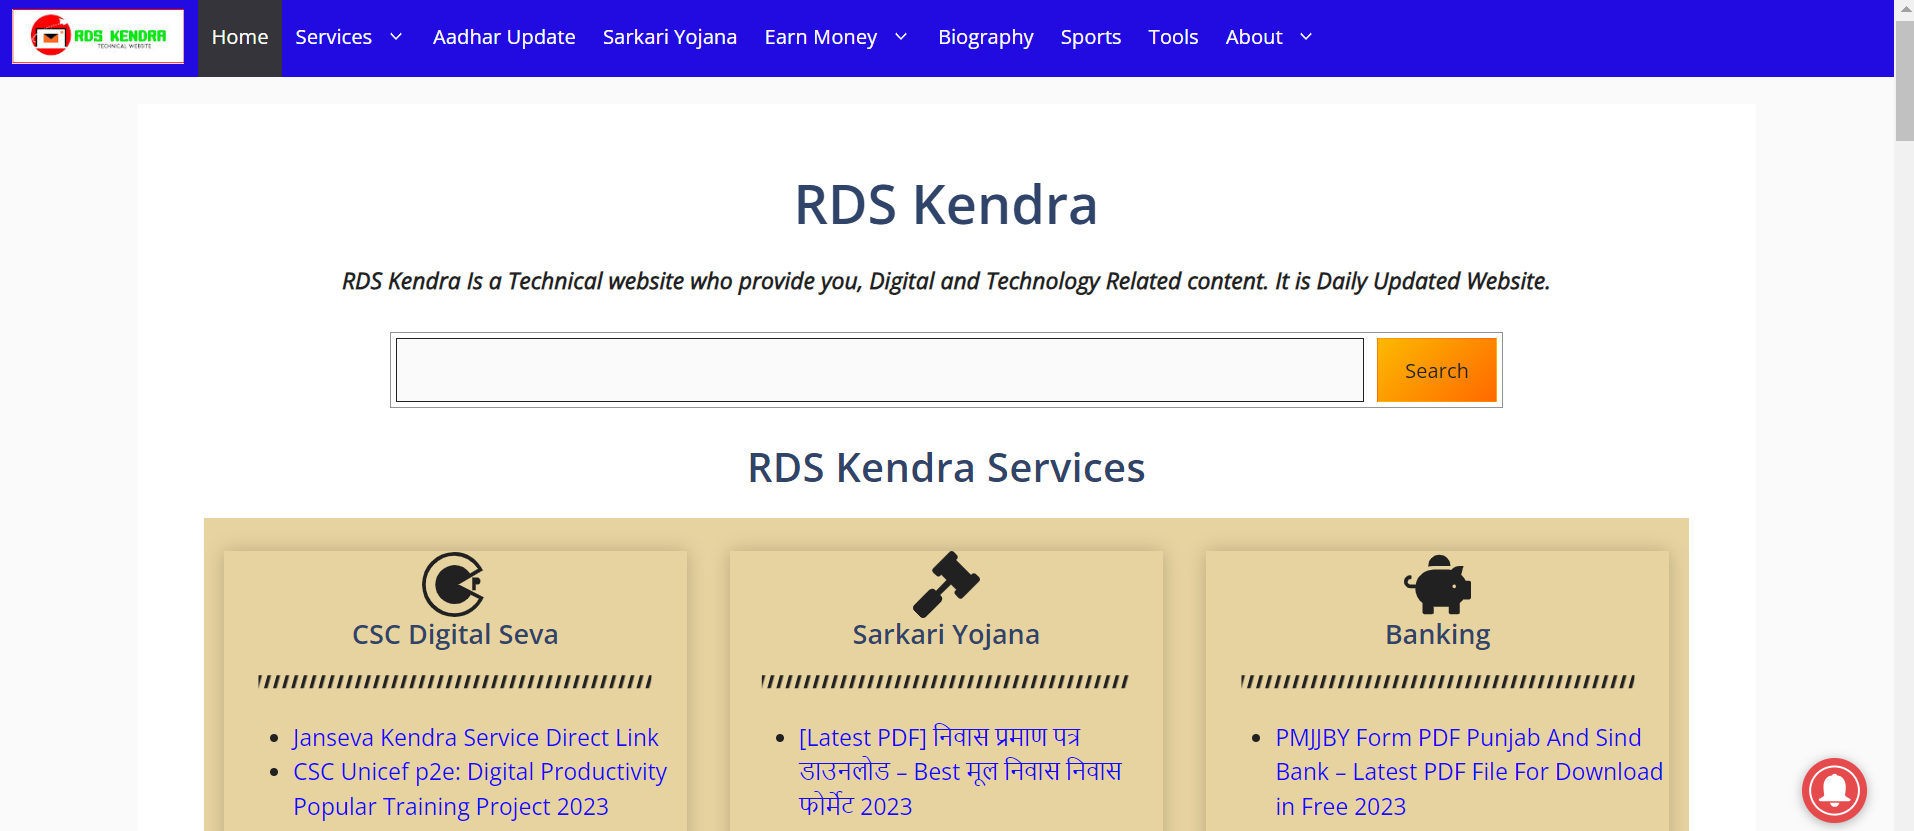 RDS Kendra